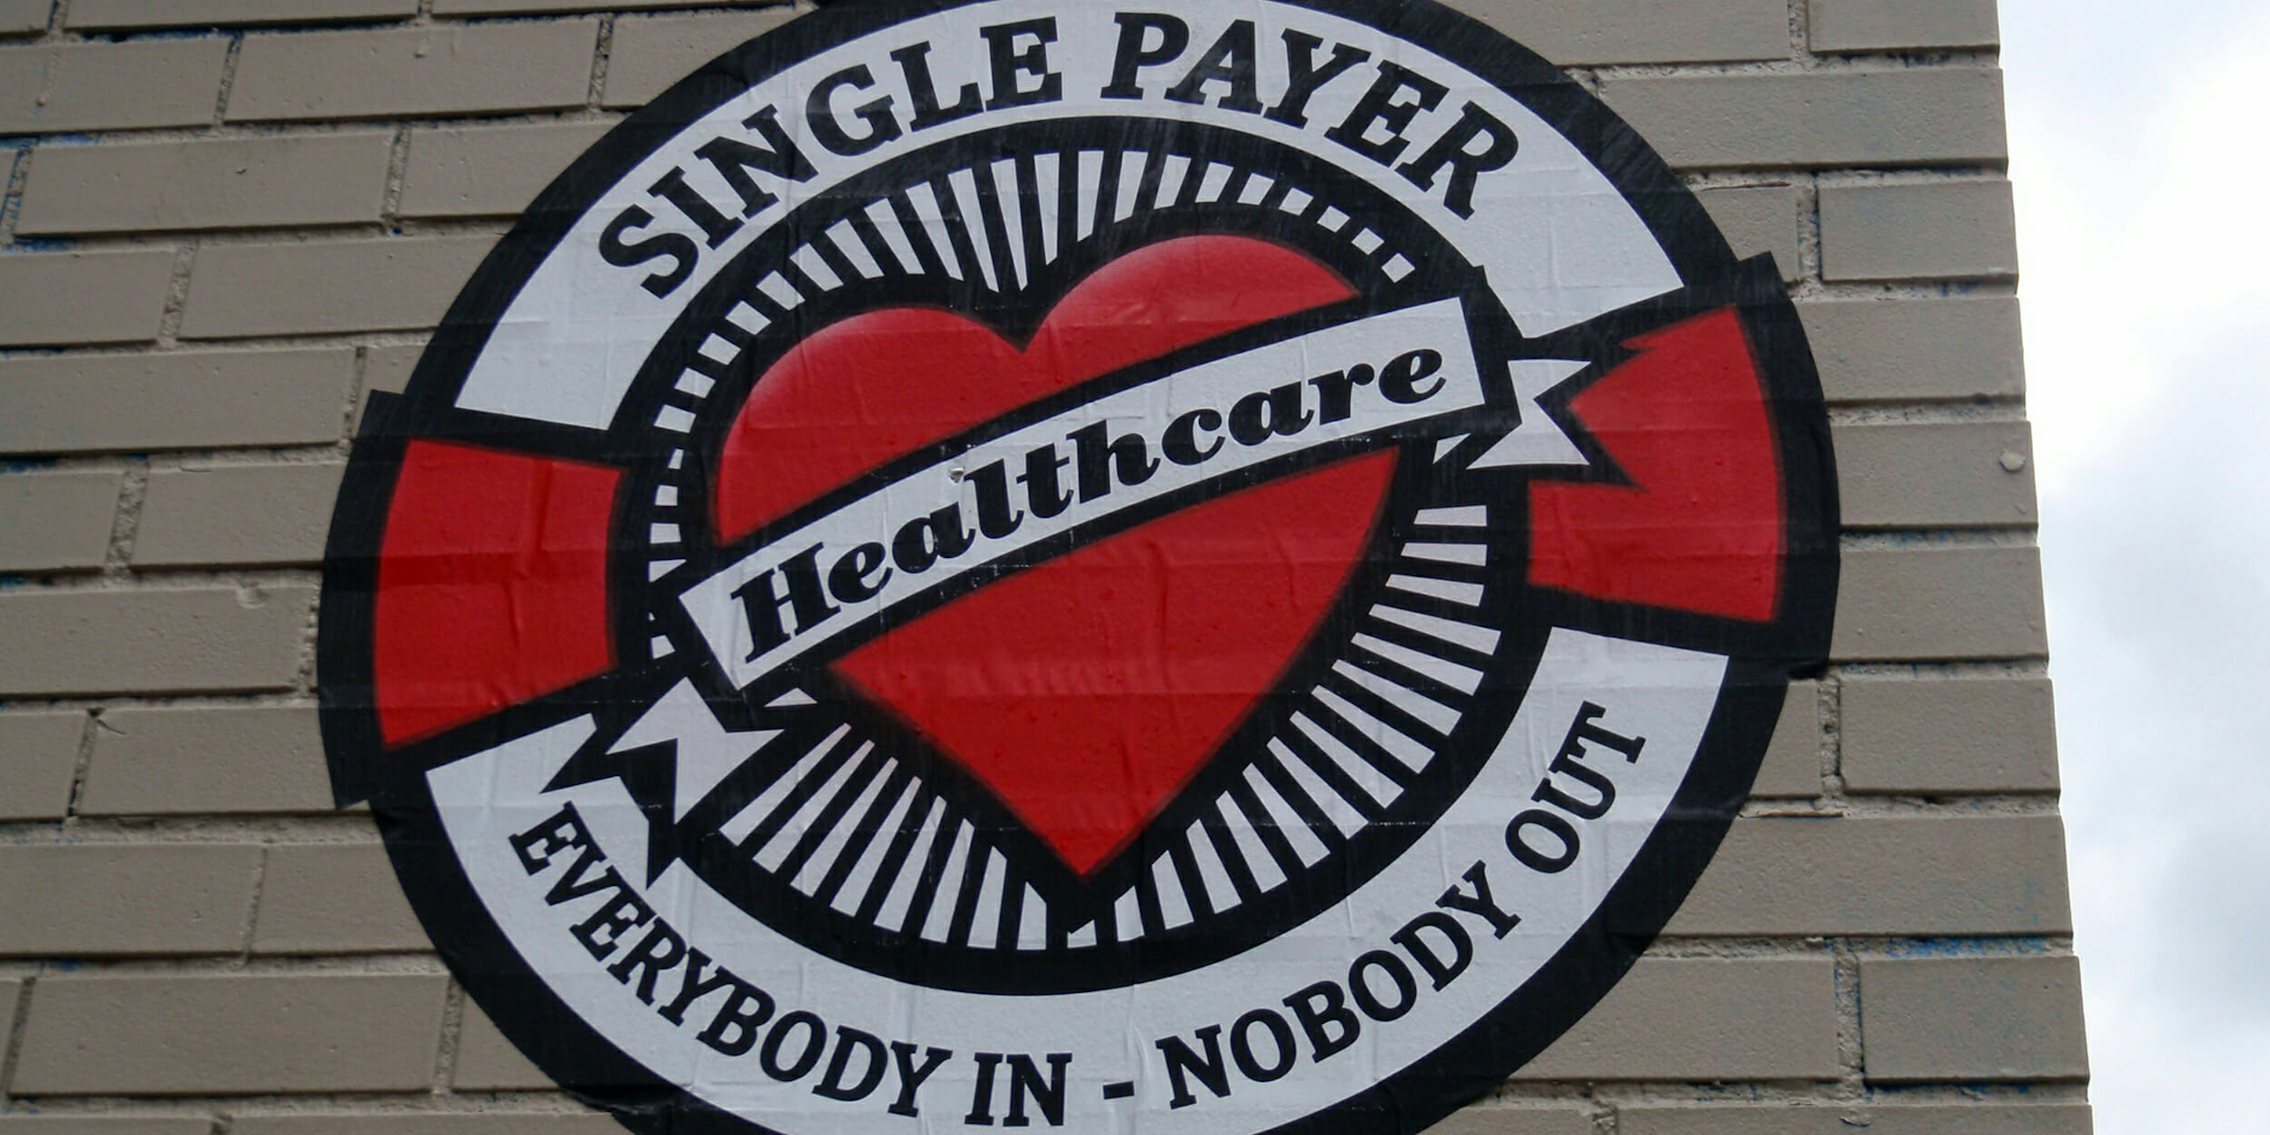 Single payer universal health care : Everybody in, nobody out slogan on heart/life preserver logo